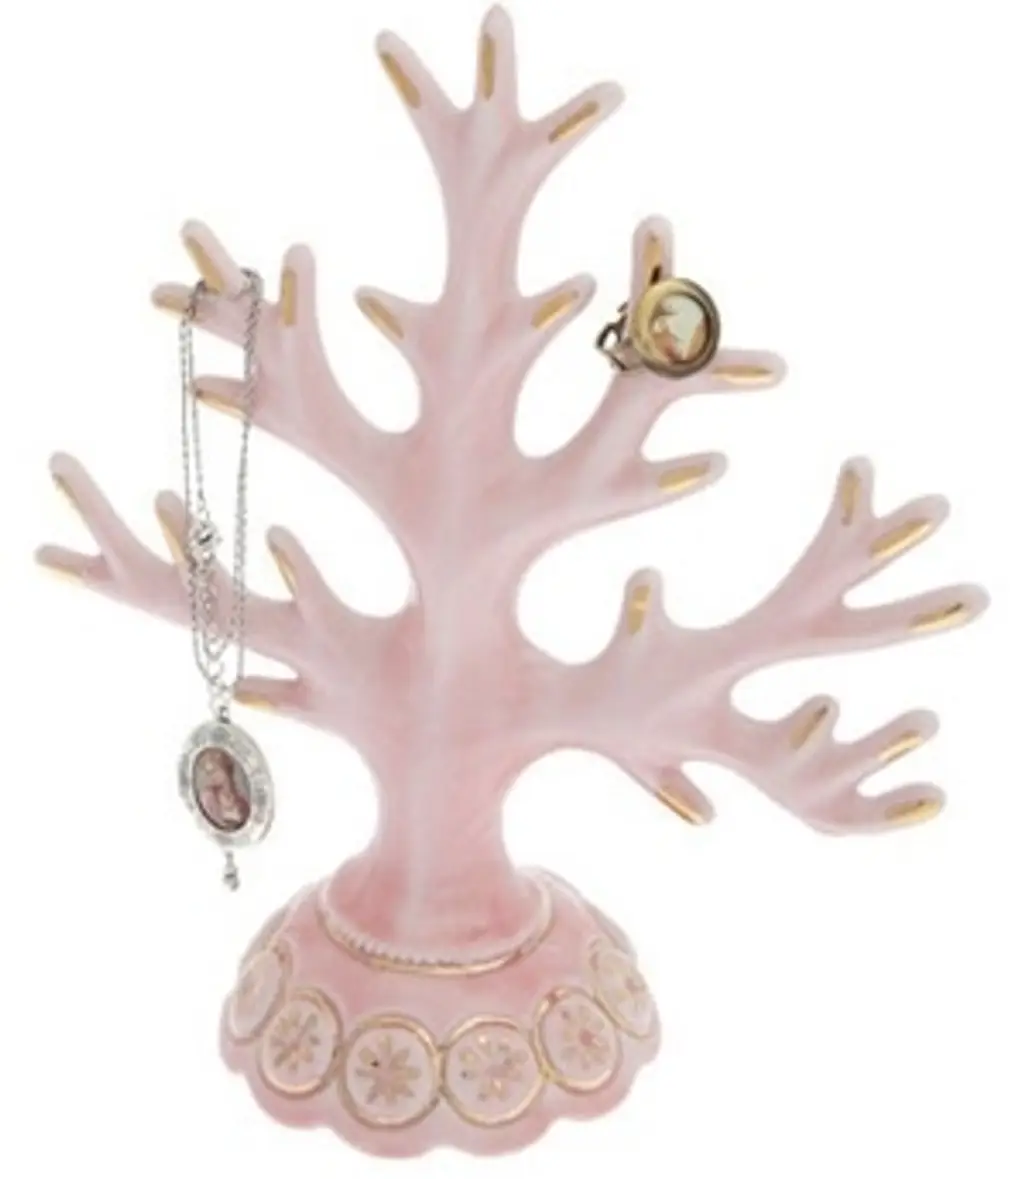 Modcloth Coral Reef Regal Jewellery Stand